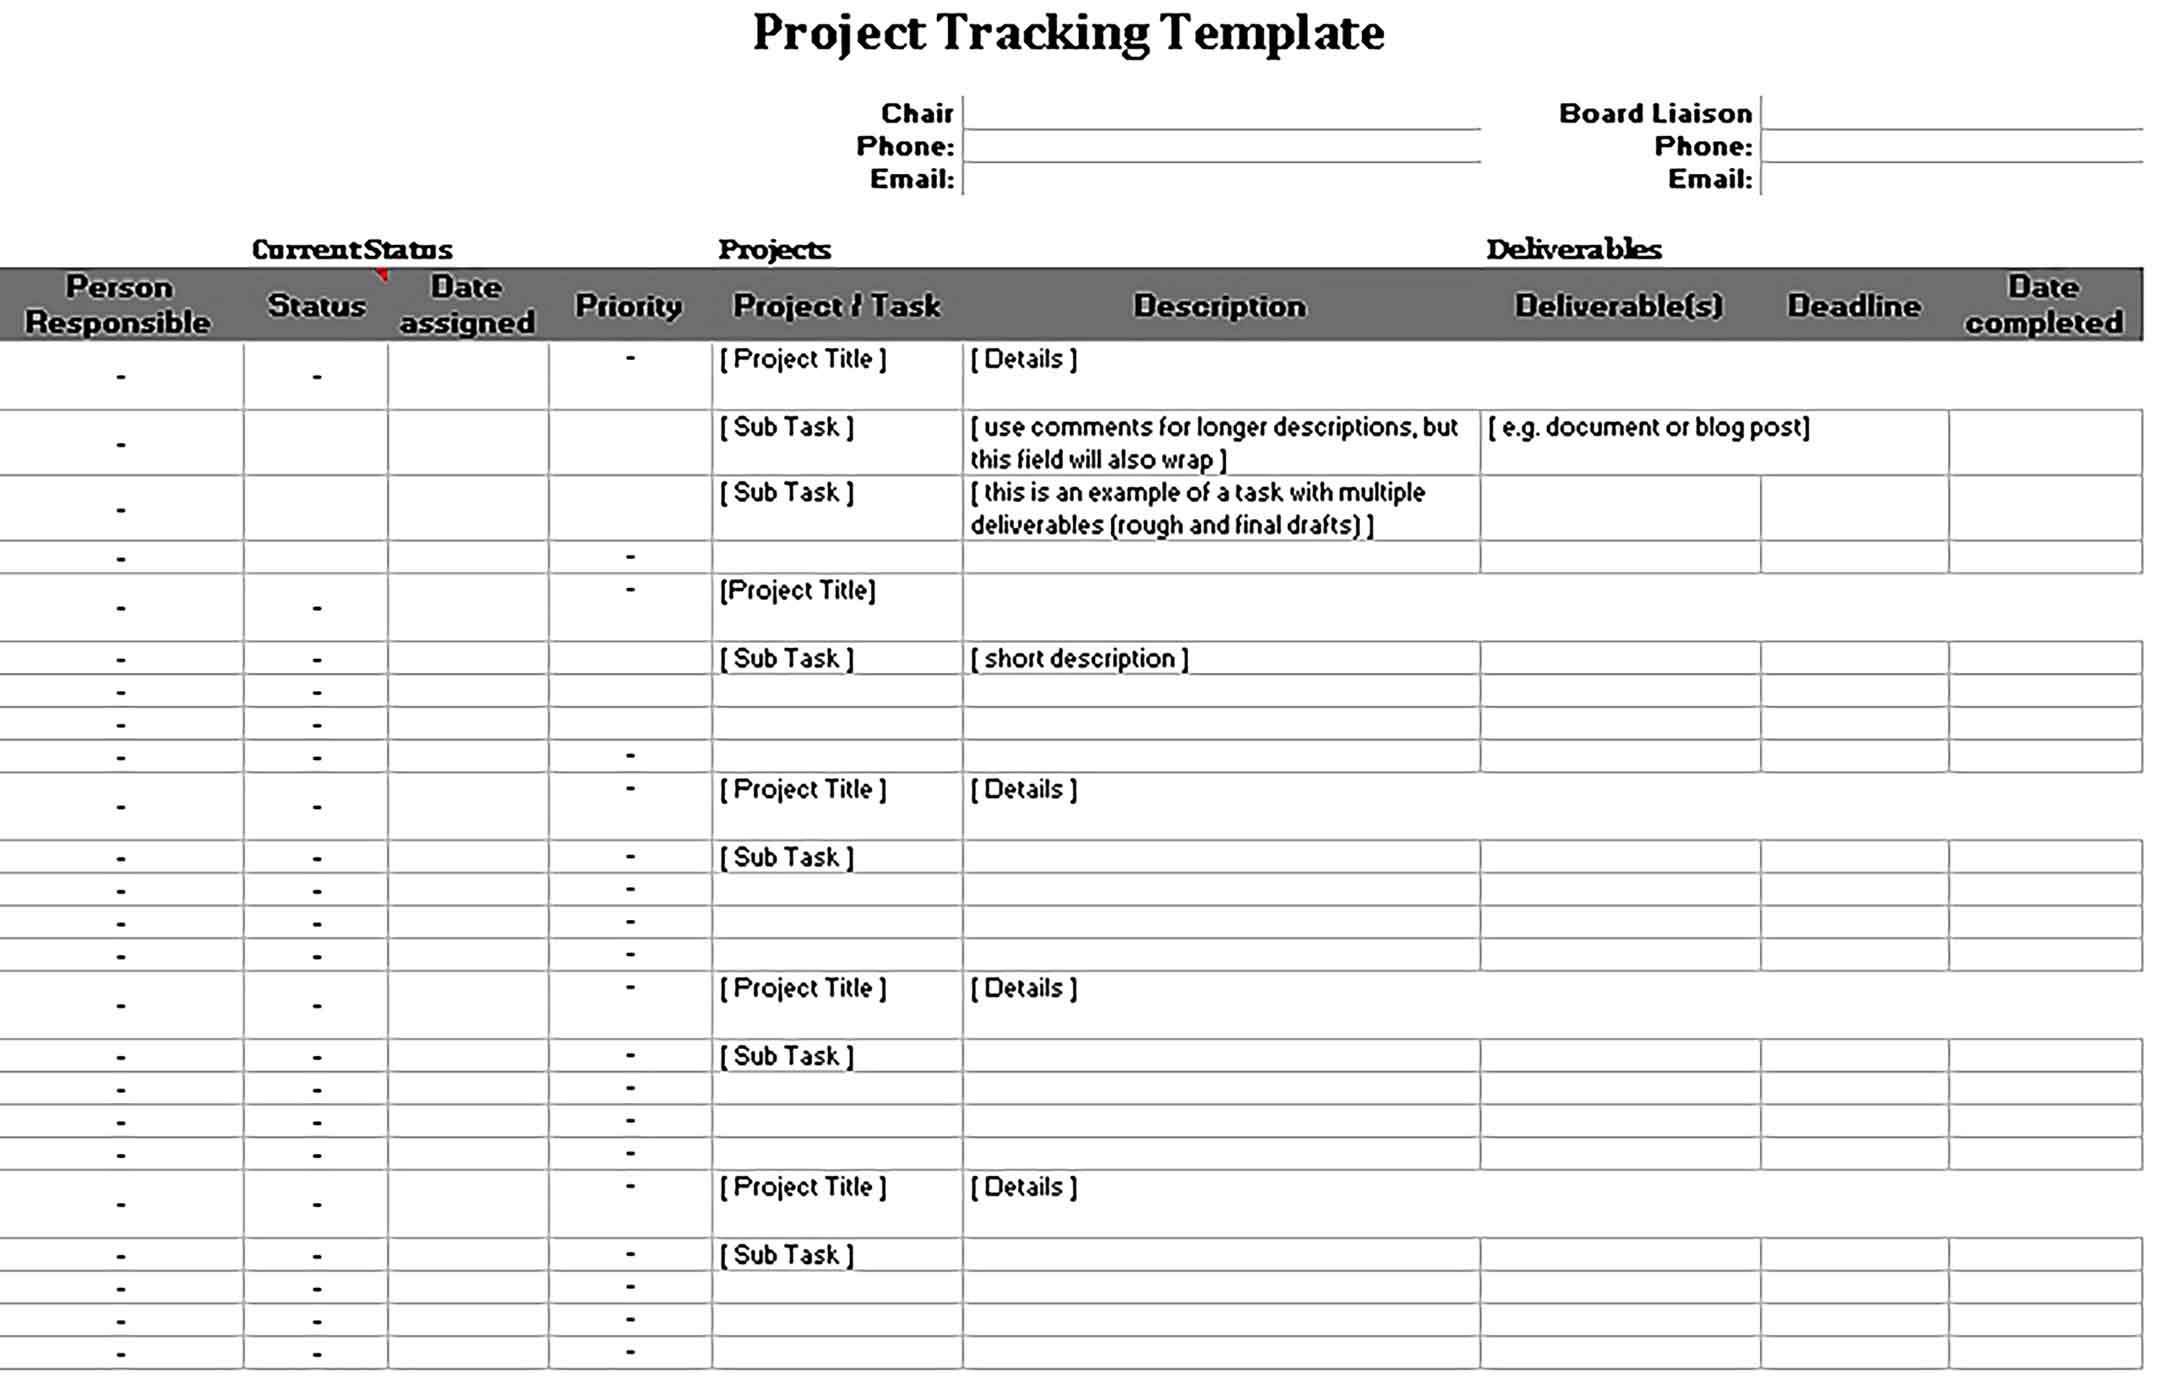 Template Project Tracking Sample